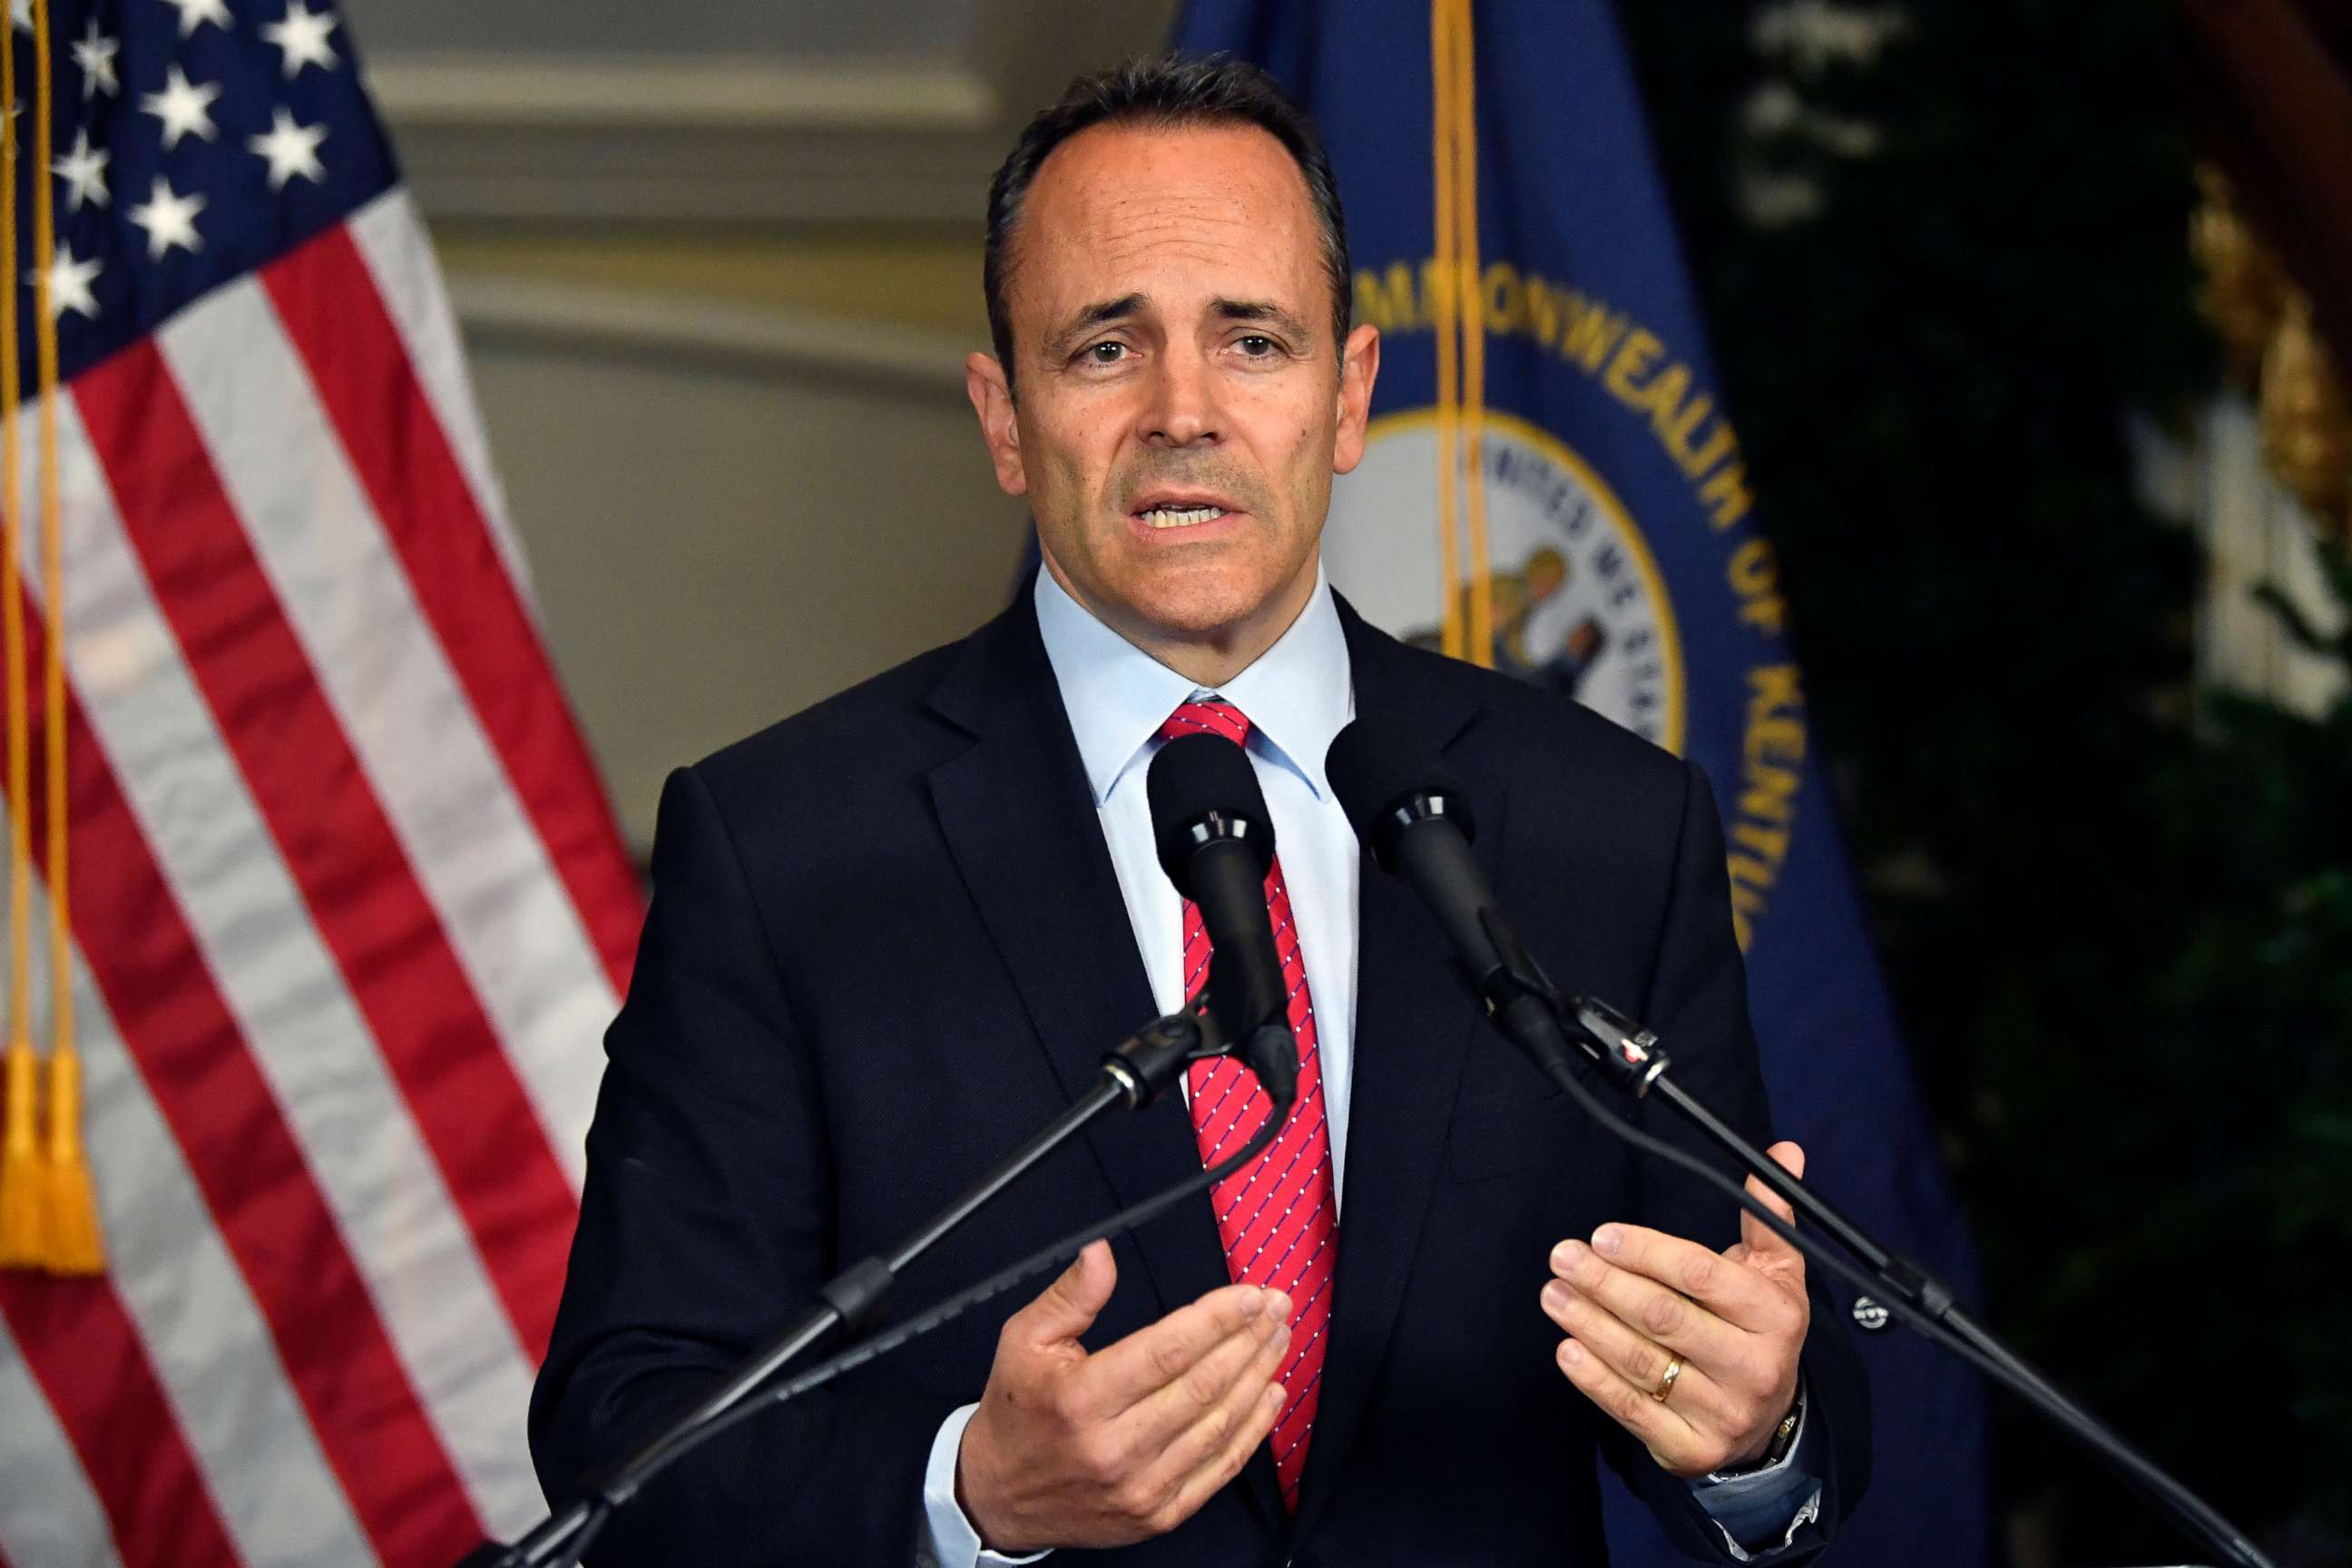 PHOTO: Kentucky Governor Matt Bevin announces his intent to call for a recanvass of the voting results from the gubernatorial elections during a press conference at the Governor's Mansion in Frankfort, Ky., Nov. 6, 2019.